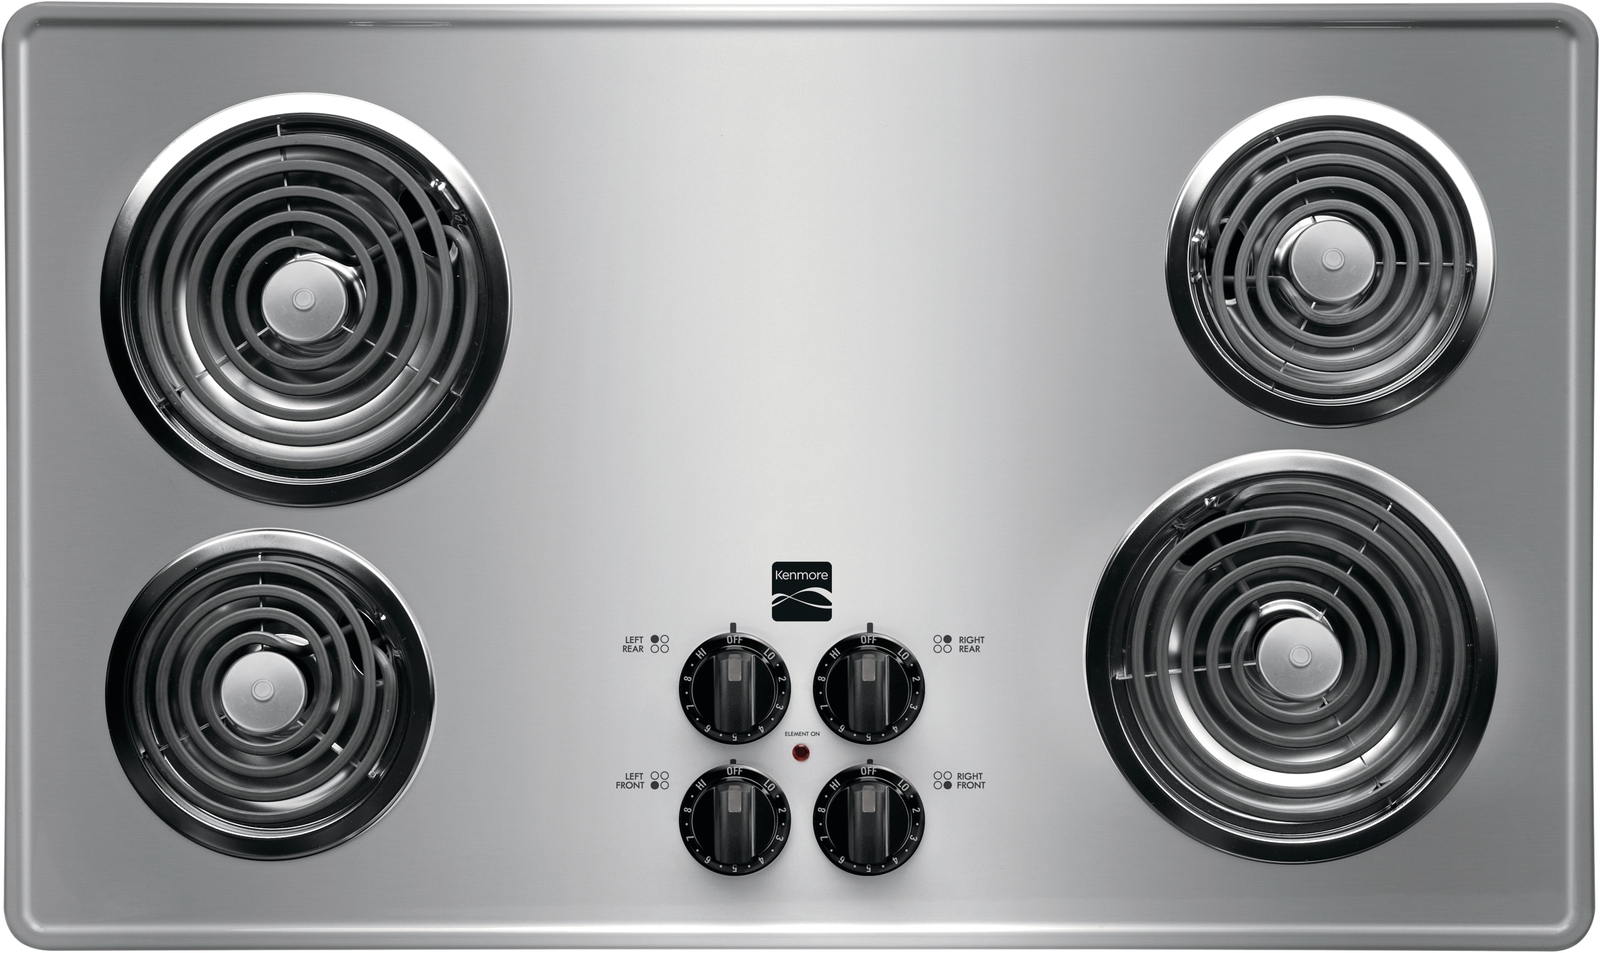 Kenmore 41323 36" Electric Coil Cooktop - Stainless Steel